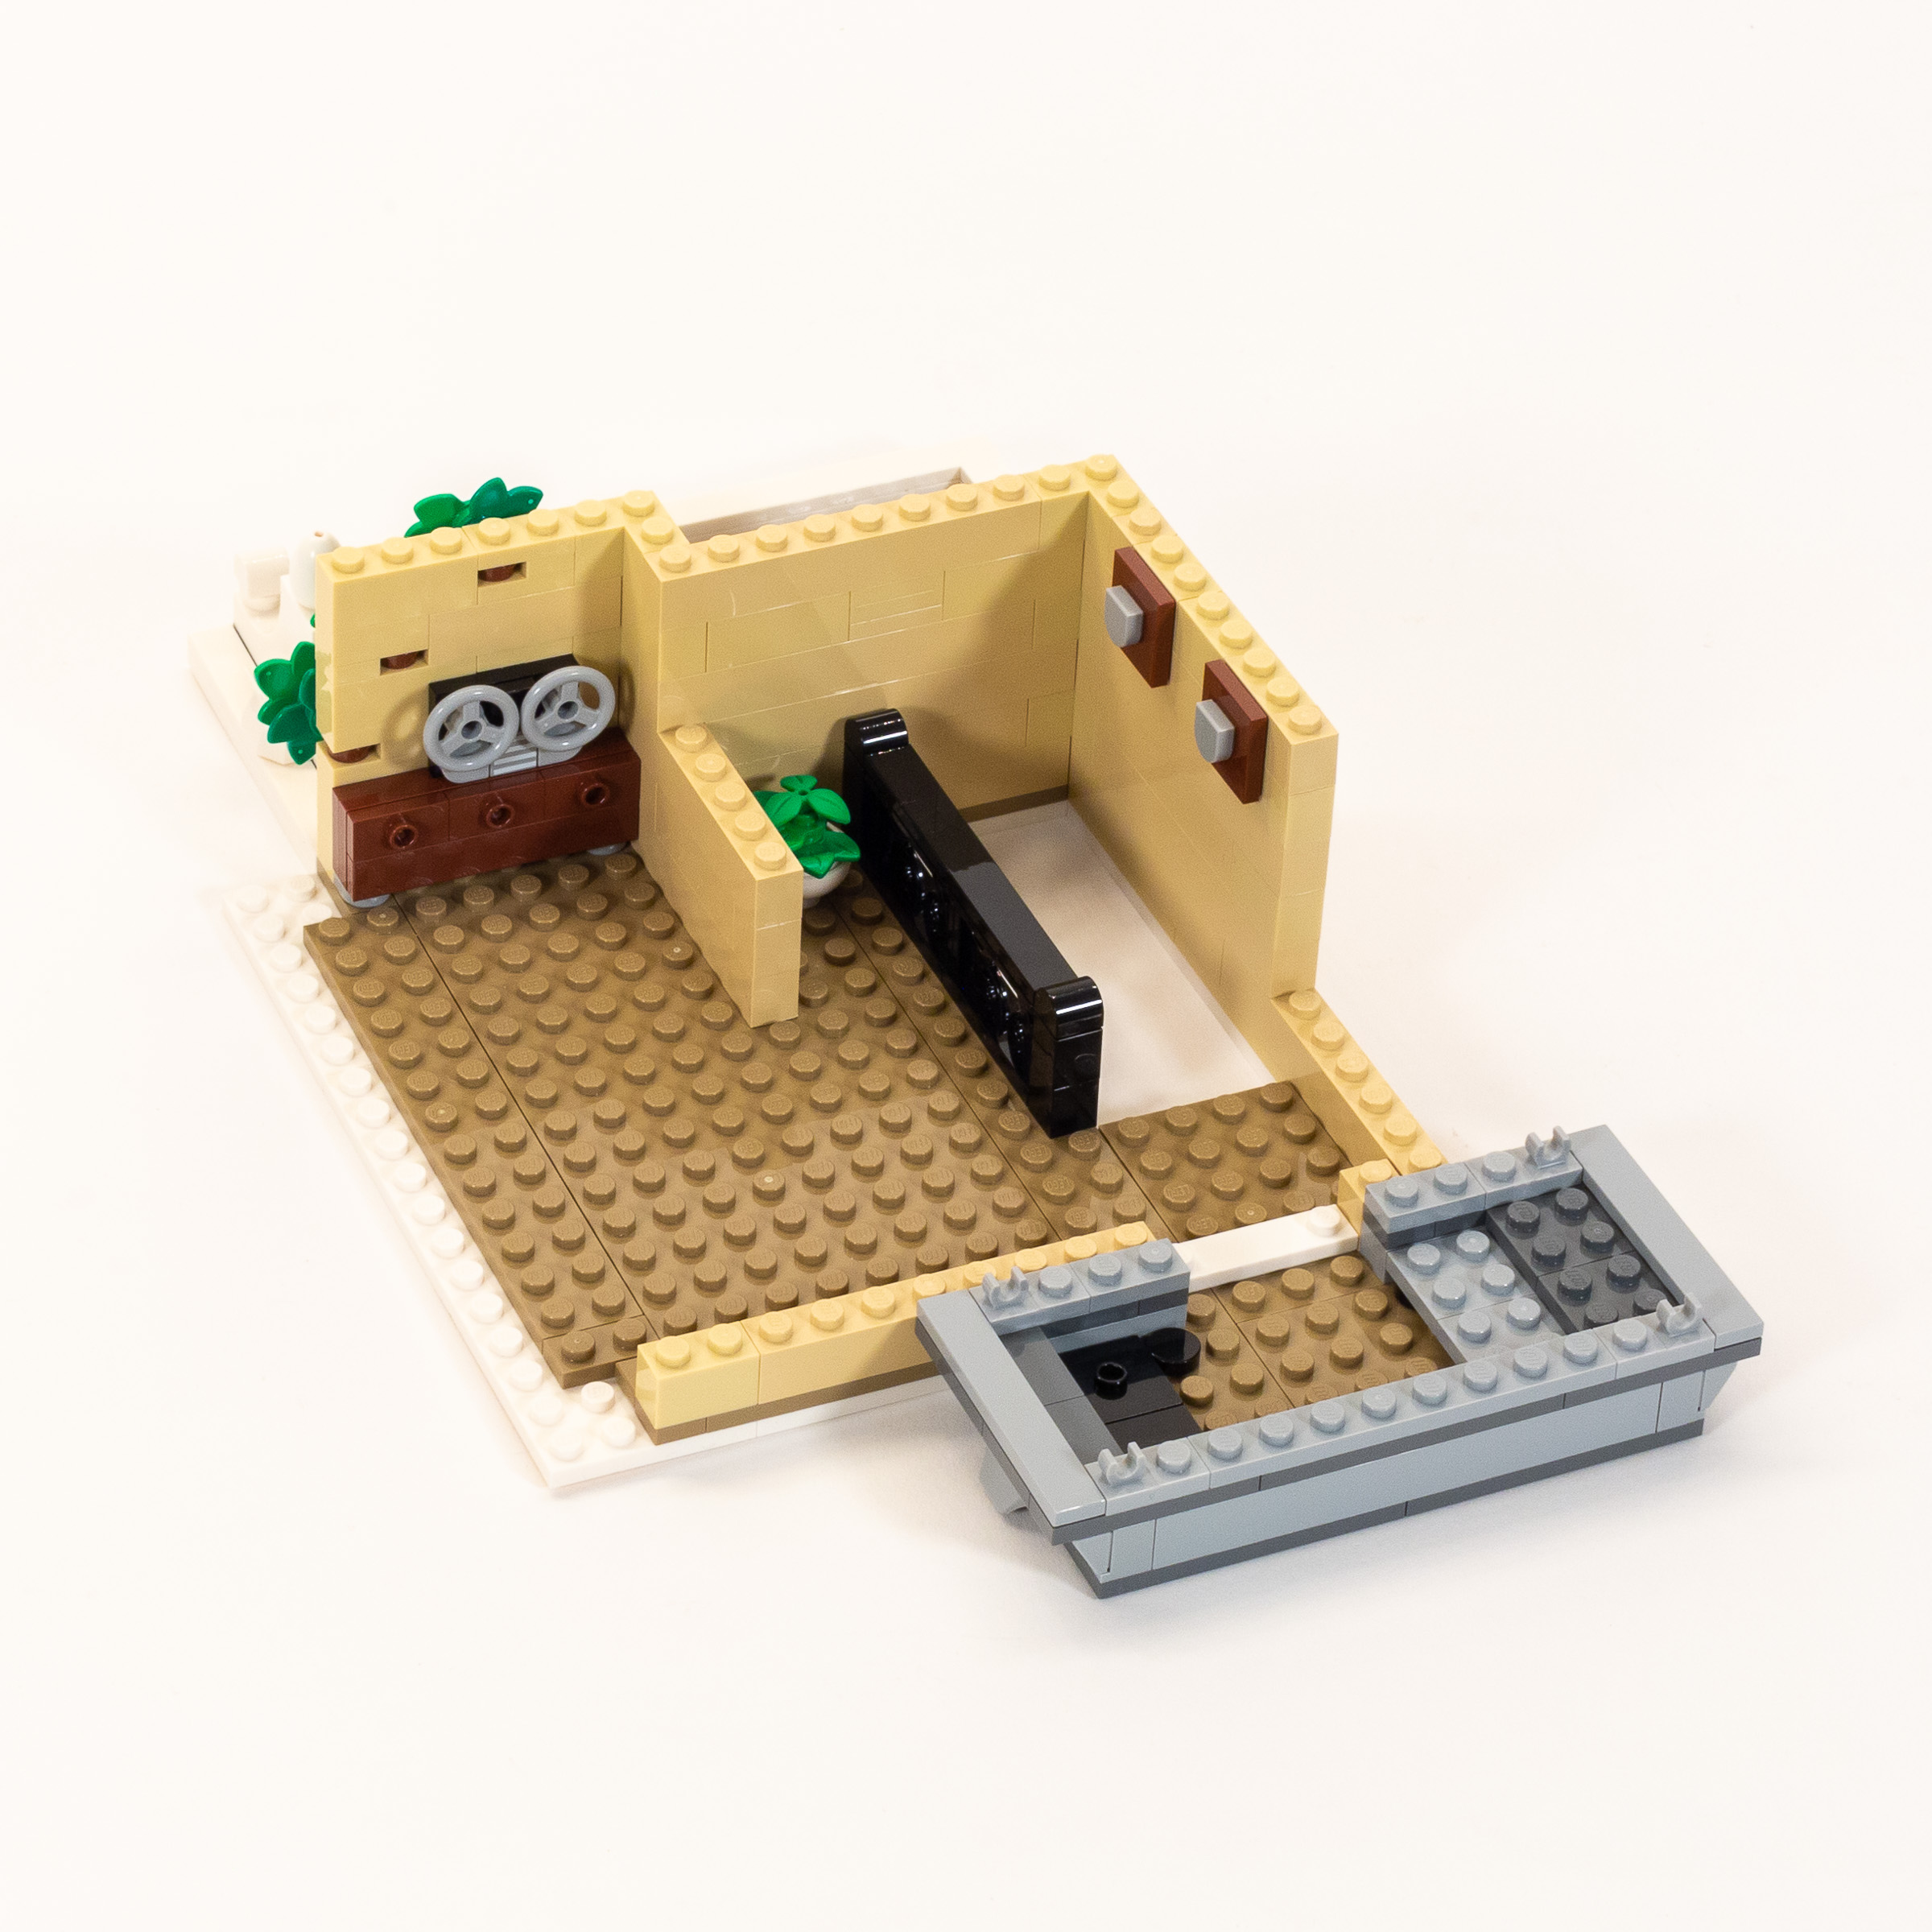 Lego police stations we wish we could buy